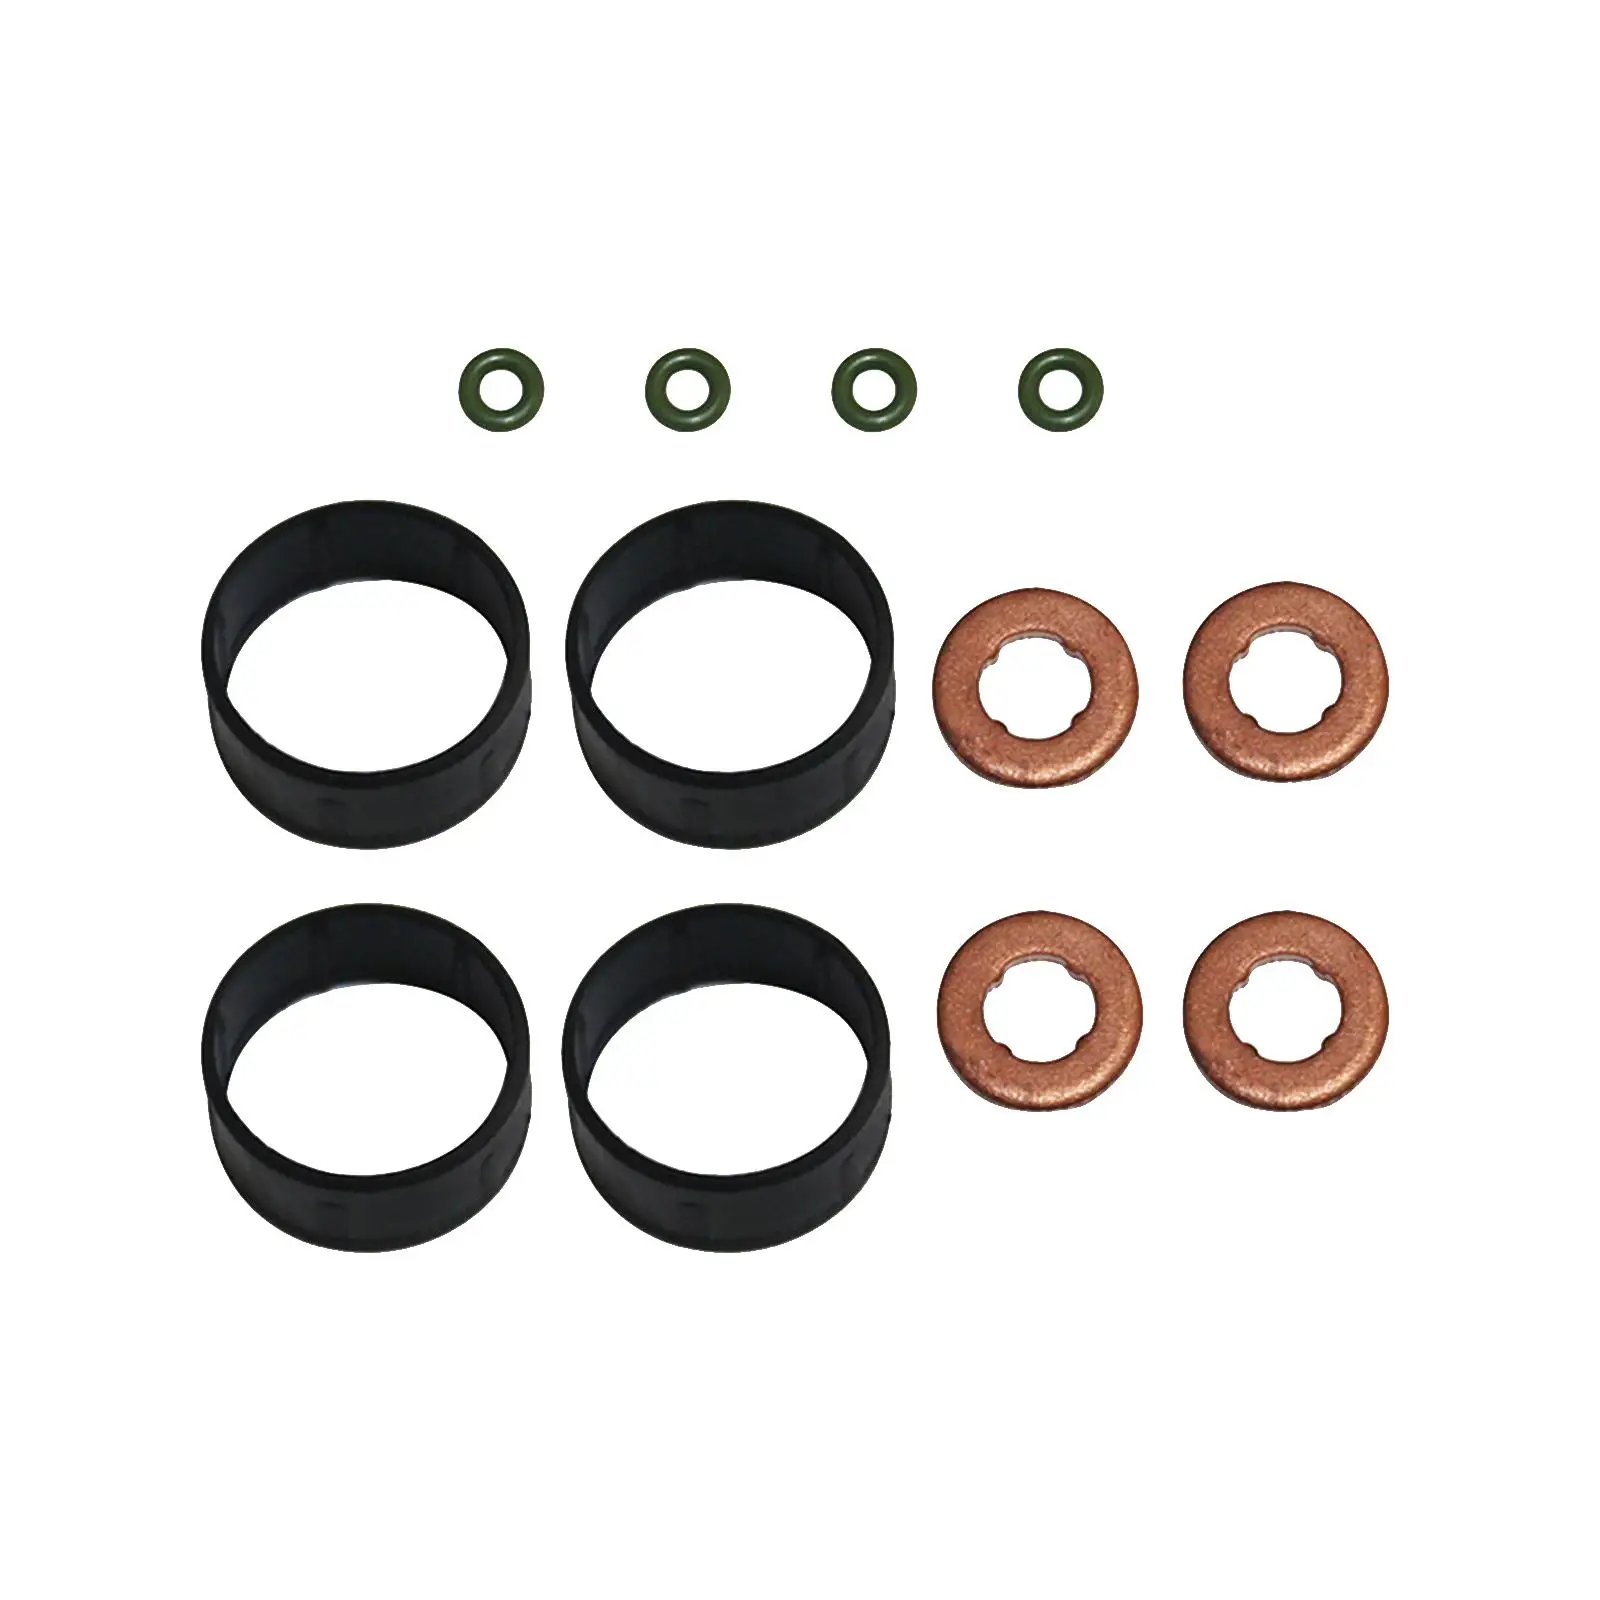 Fuel Injector Seal Washer O-ring Kit 1204698 Directly Replace High Quality for Ford Fusion 1.4 Tdci Automotive Accessories